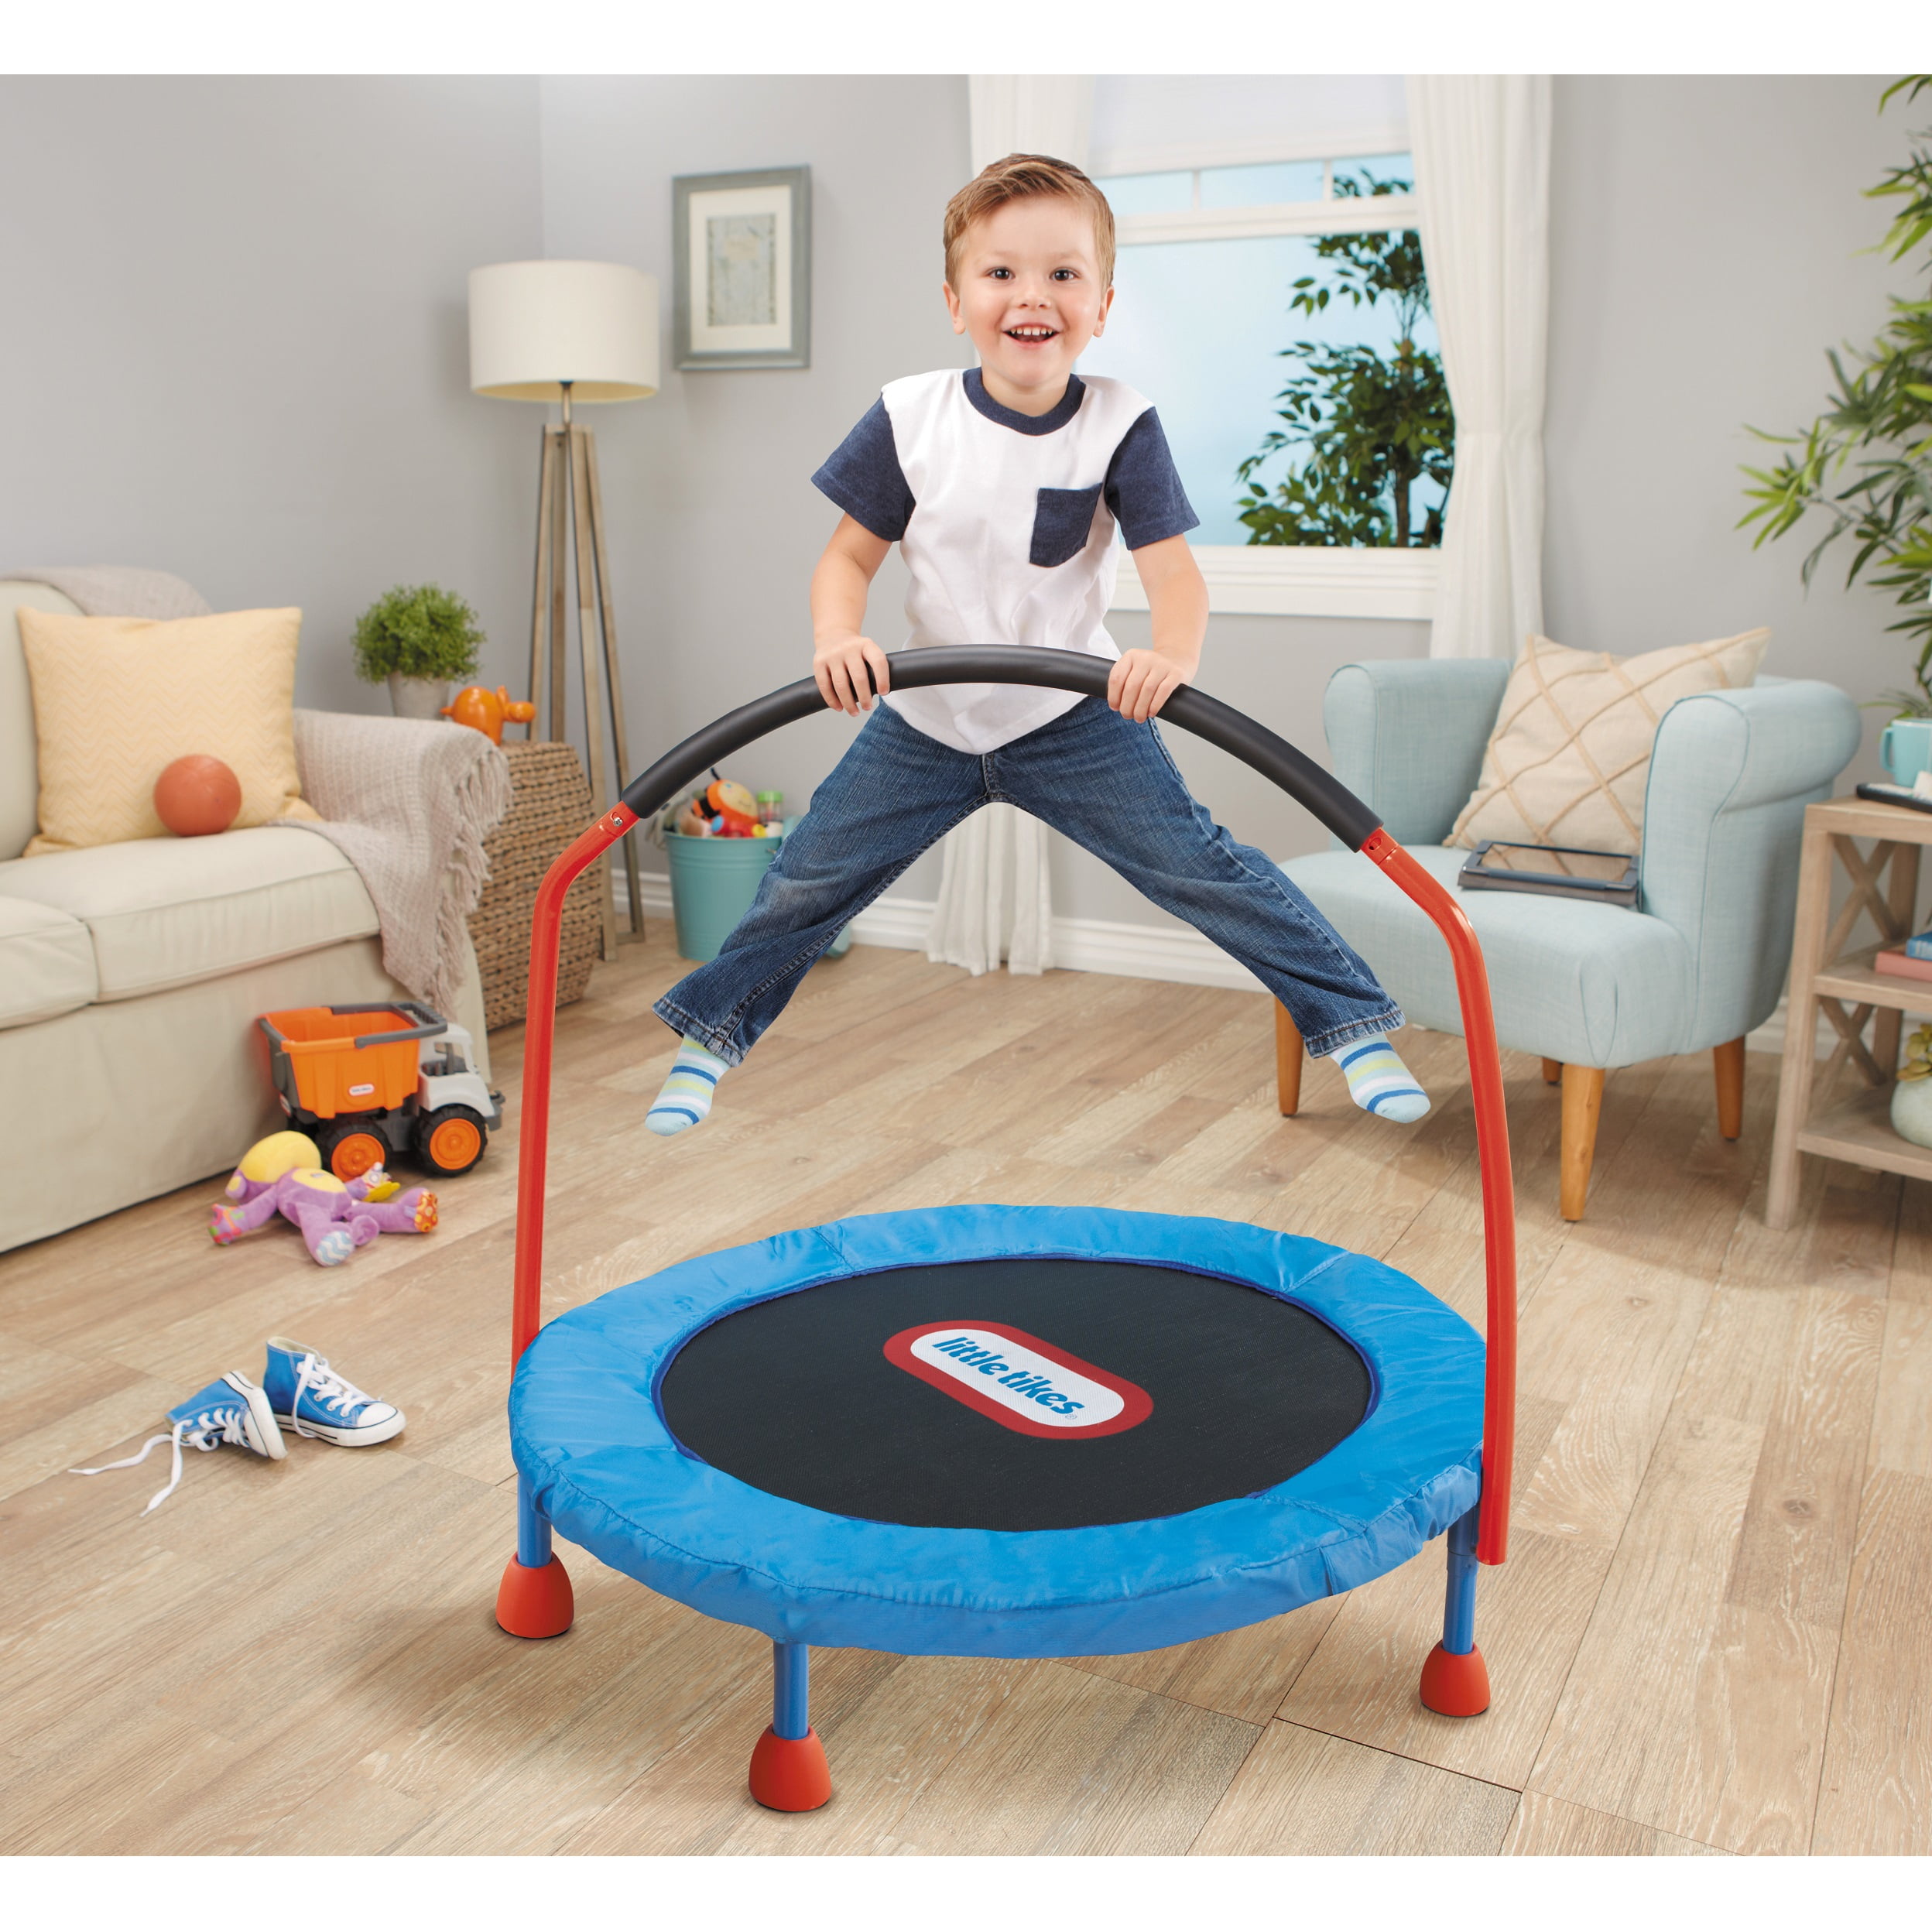 A toddler jumping on a Little Tikes Toddler Trampoline